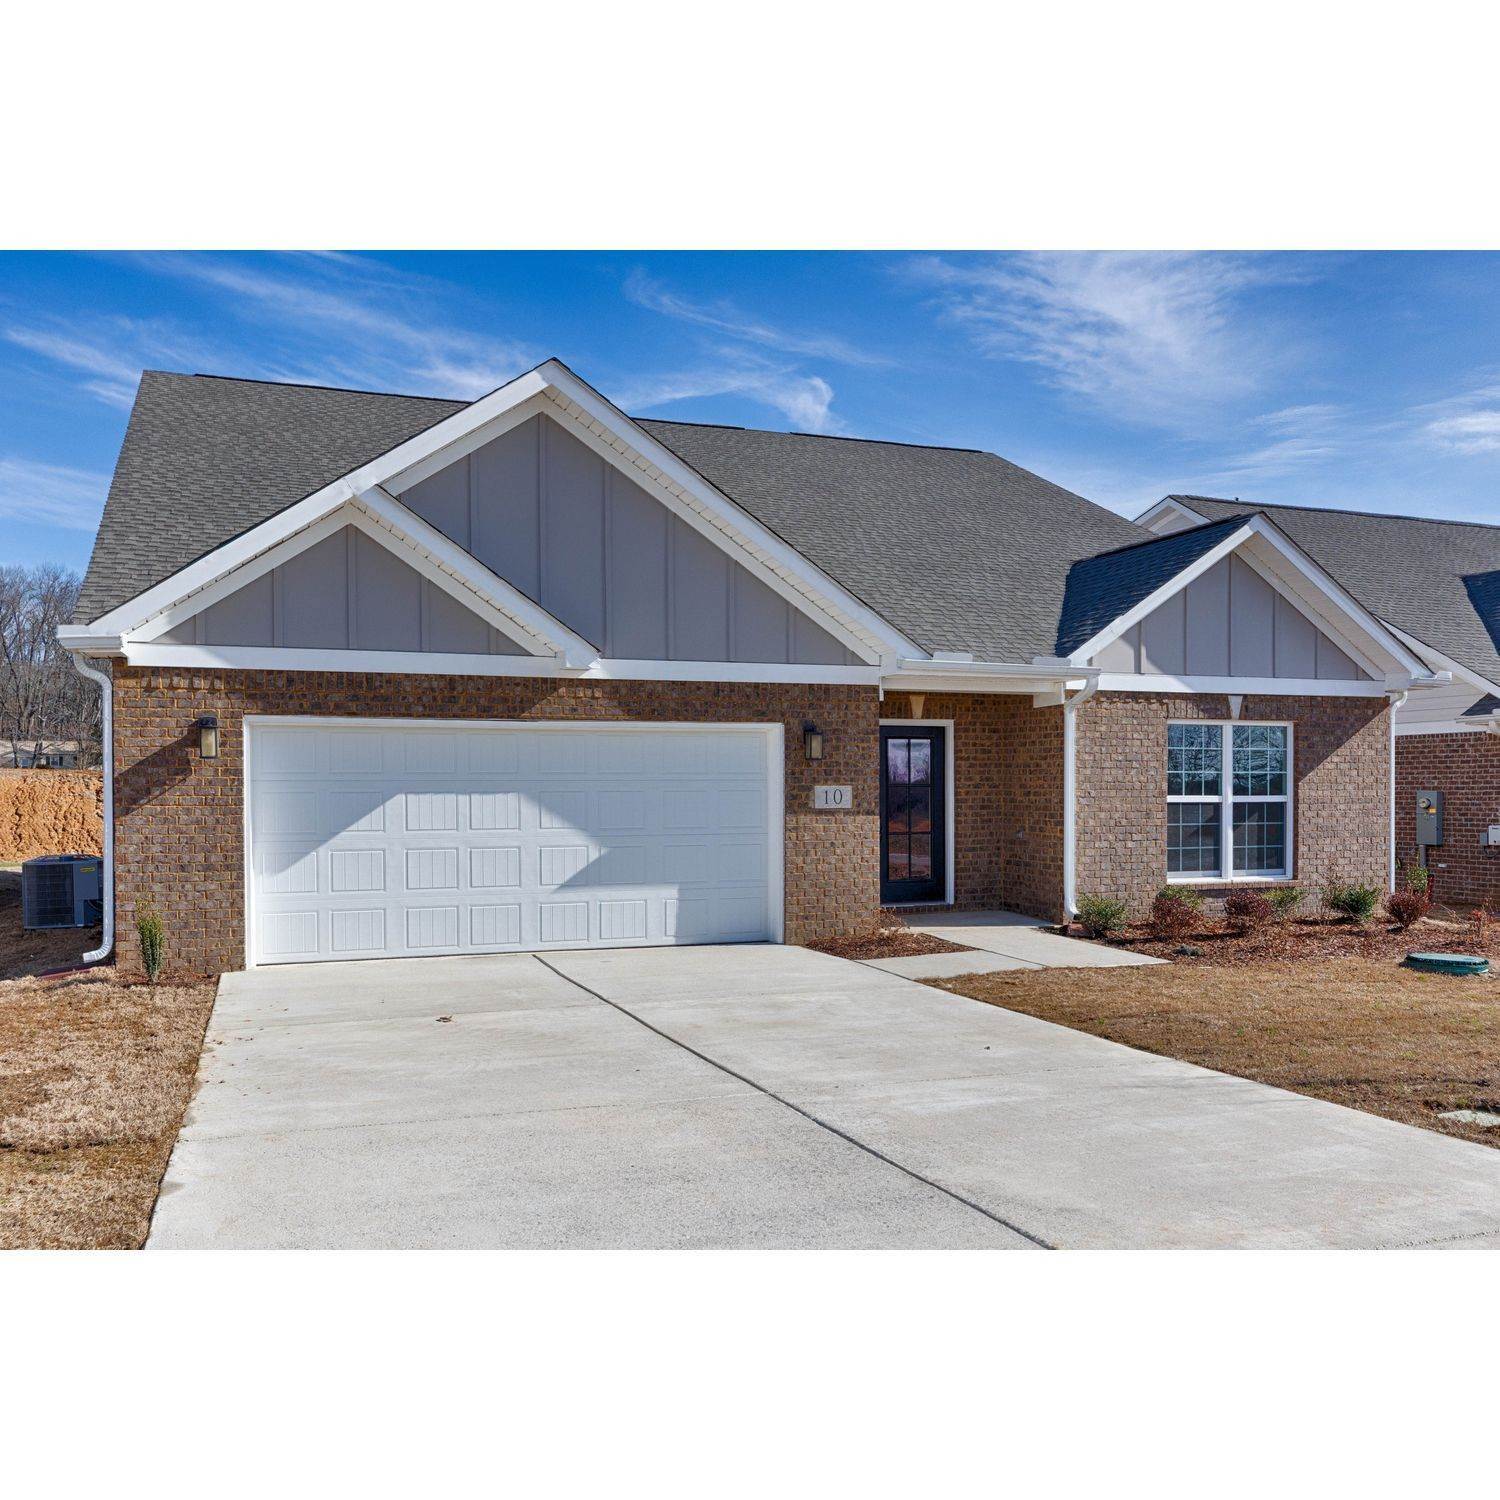 Single Family for Sale at Fayetteville, TN 37334